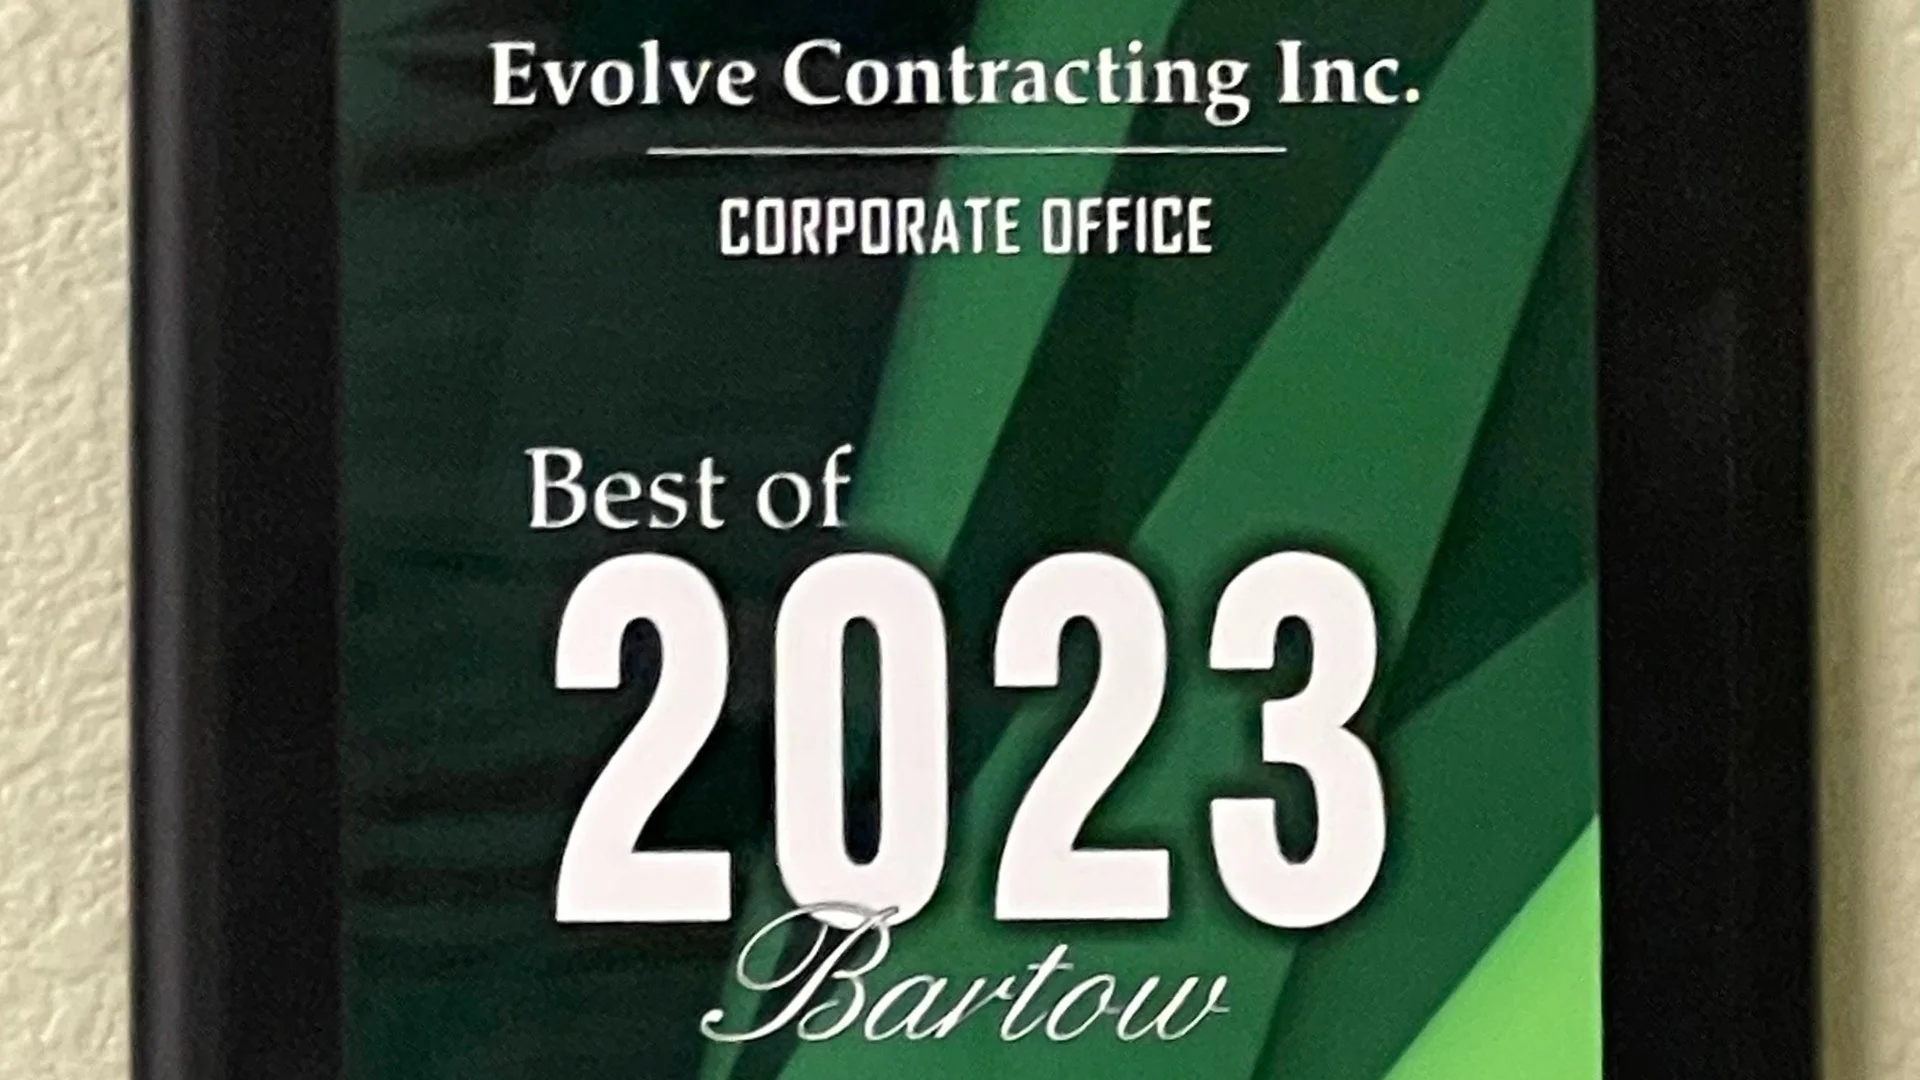 Evolve Contracting Inc. Receives 2023 Best of Bartow Award